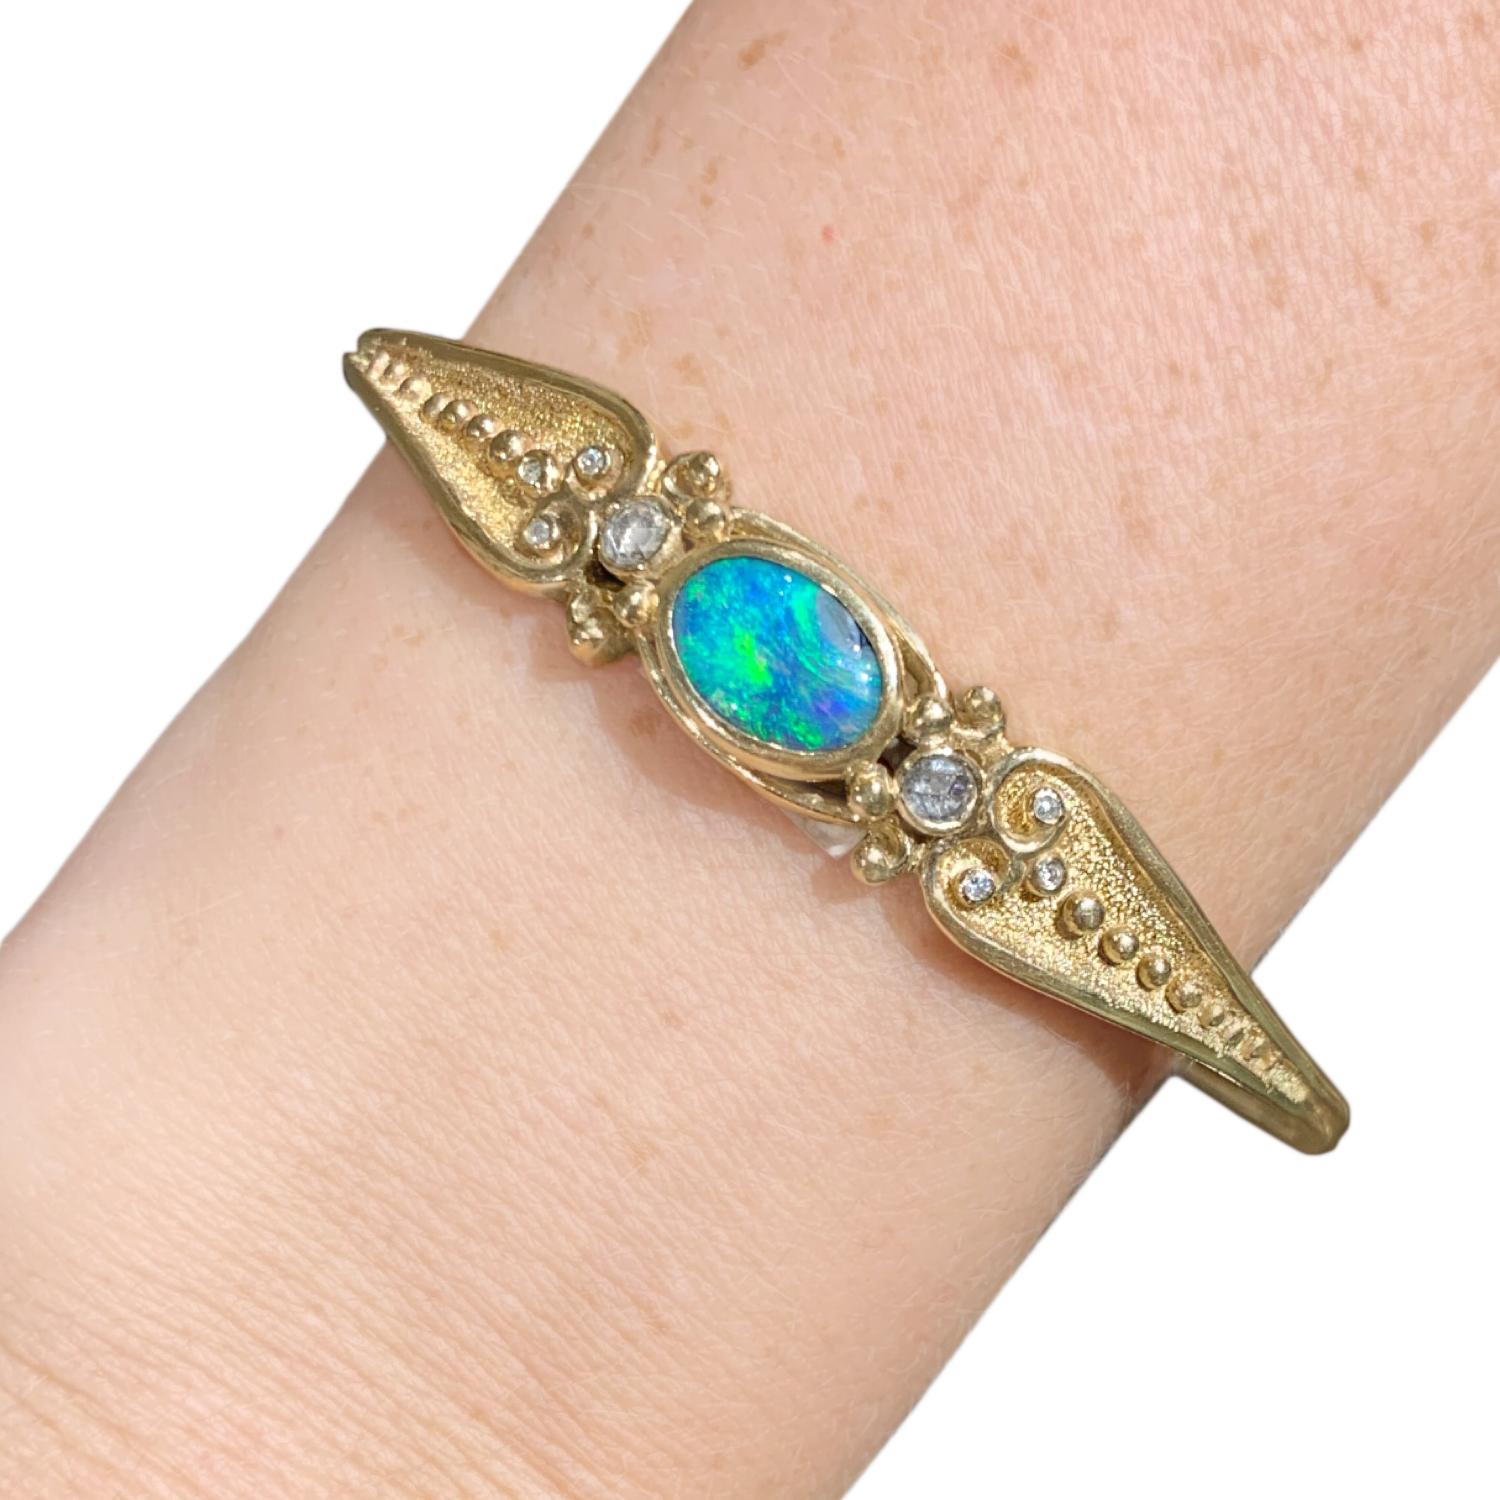 One of a Kind Deco Cuff Bracelet by acclaimed designer Julie Romanenko hand-fabricated in intricately textured and beaded solid 14k yellow gold showcasing a gorgeous 3.0 carat oval black opal cabochon flanked by two rose-cut white diamonds and